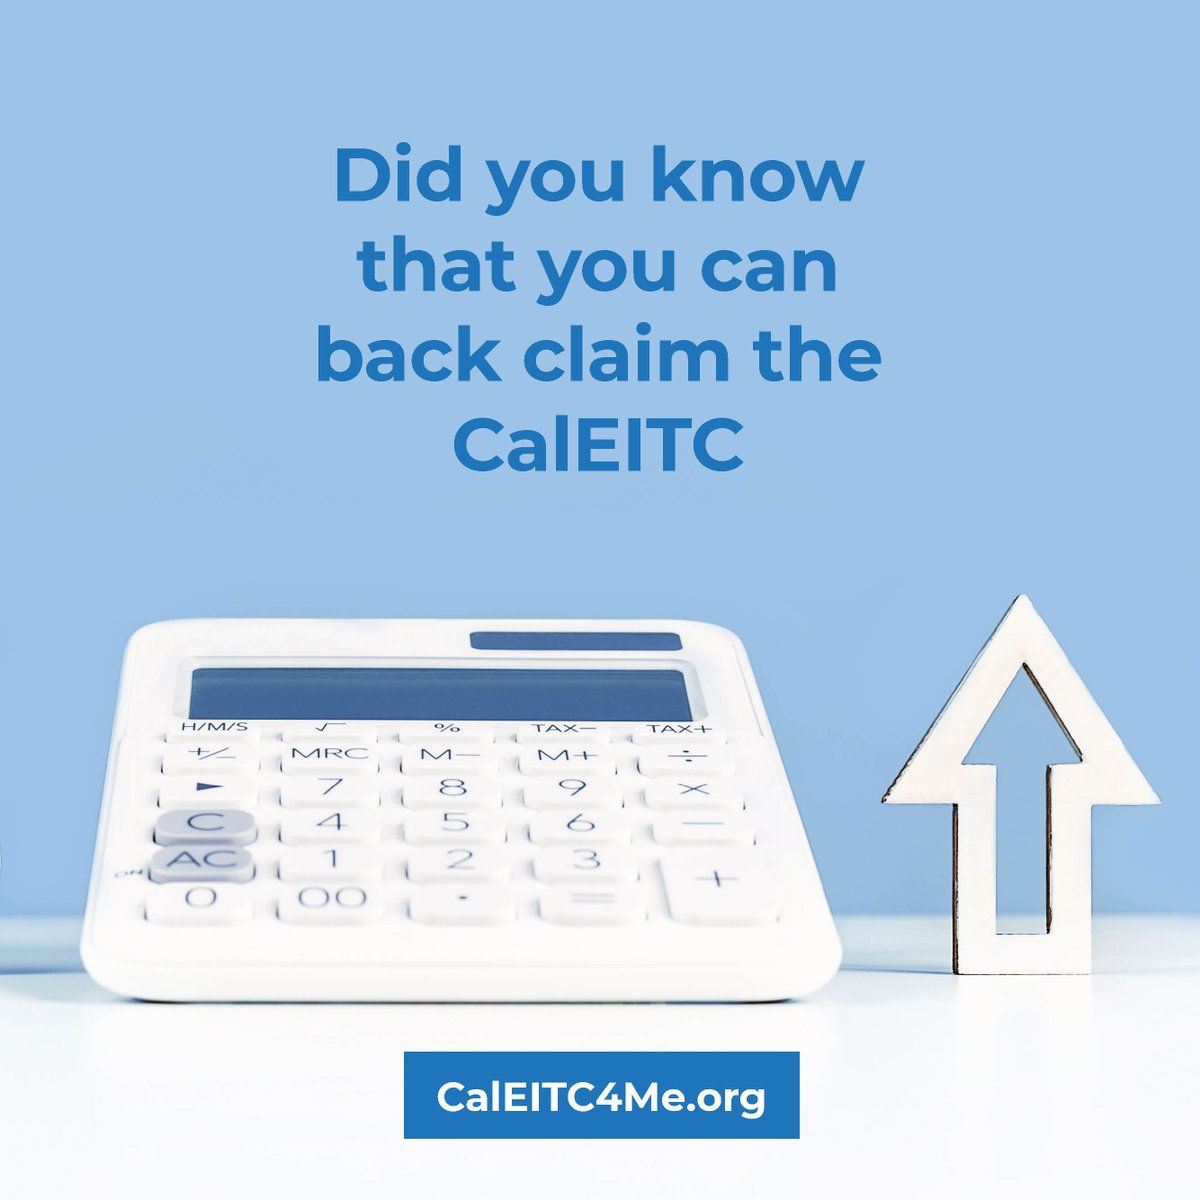 Did you know that you can back claim the CalEITC if you were qualified to receive it and didn't claim it? You may claim to receive a refund for up to four prior years by filing or amending state tax returns for those years. Find out more at caleitc.org.